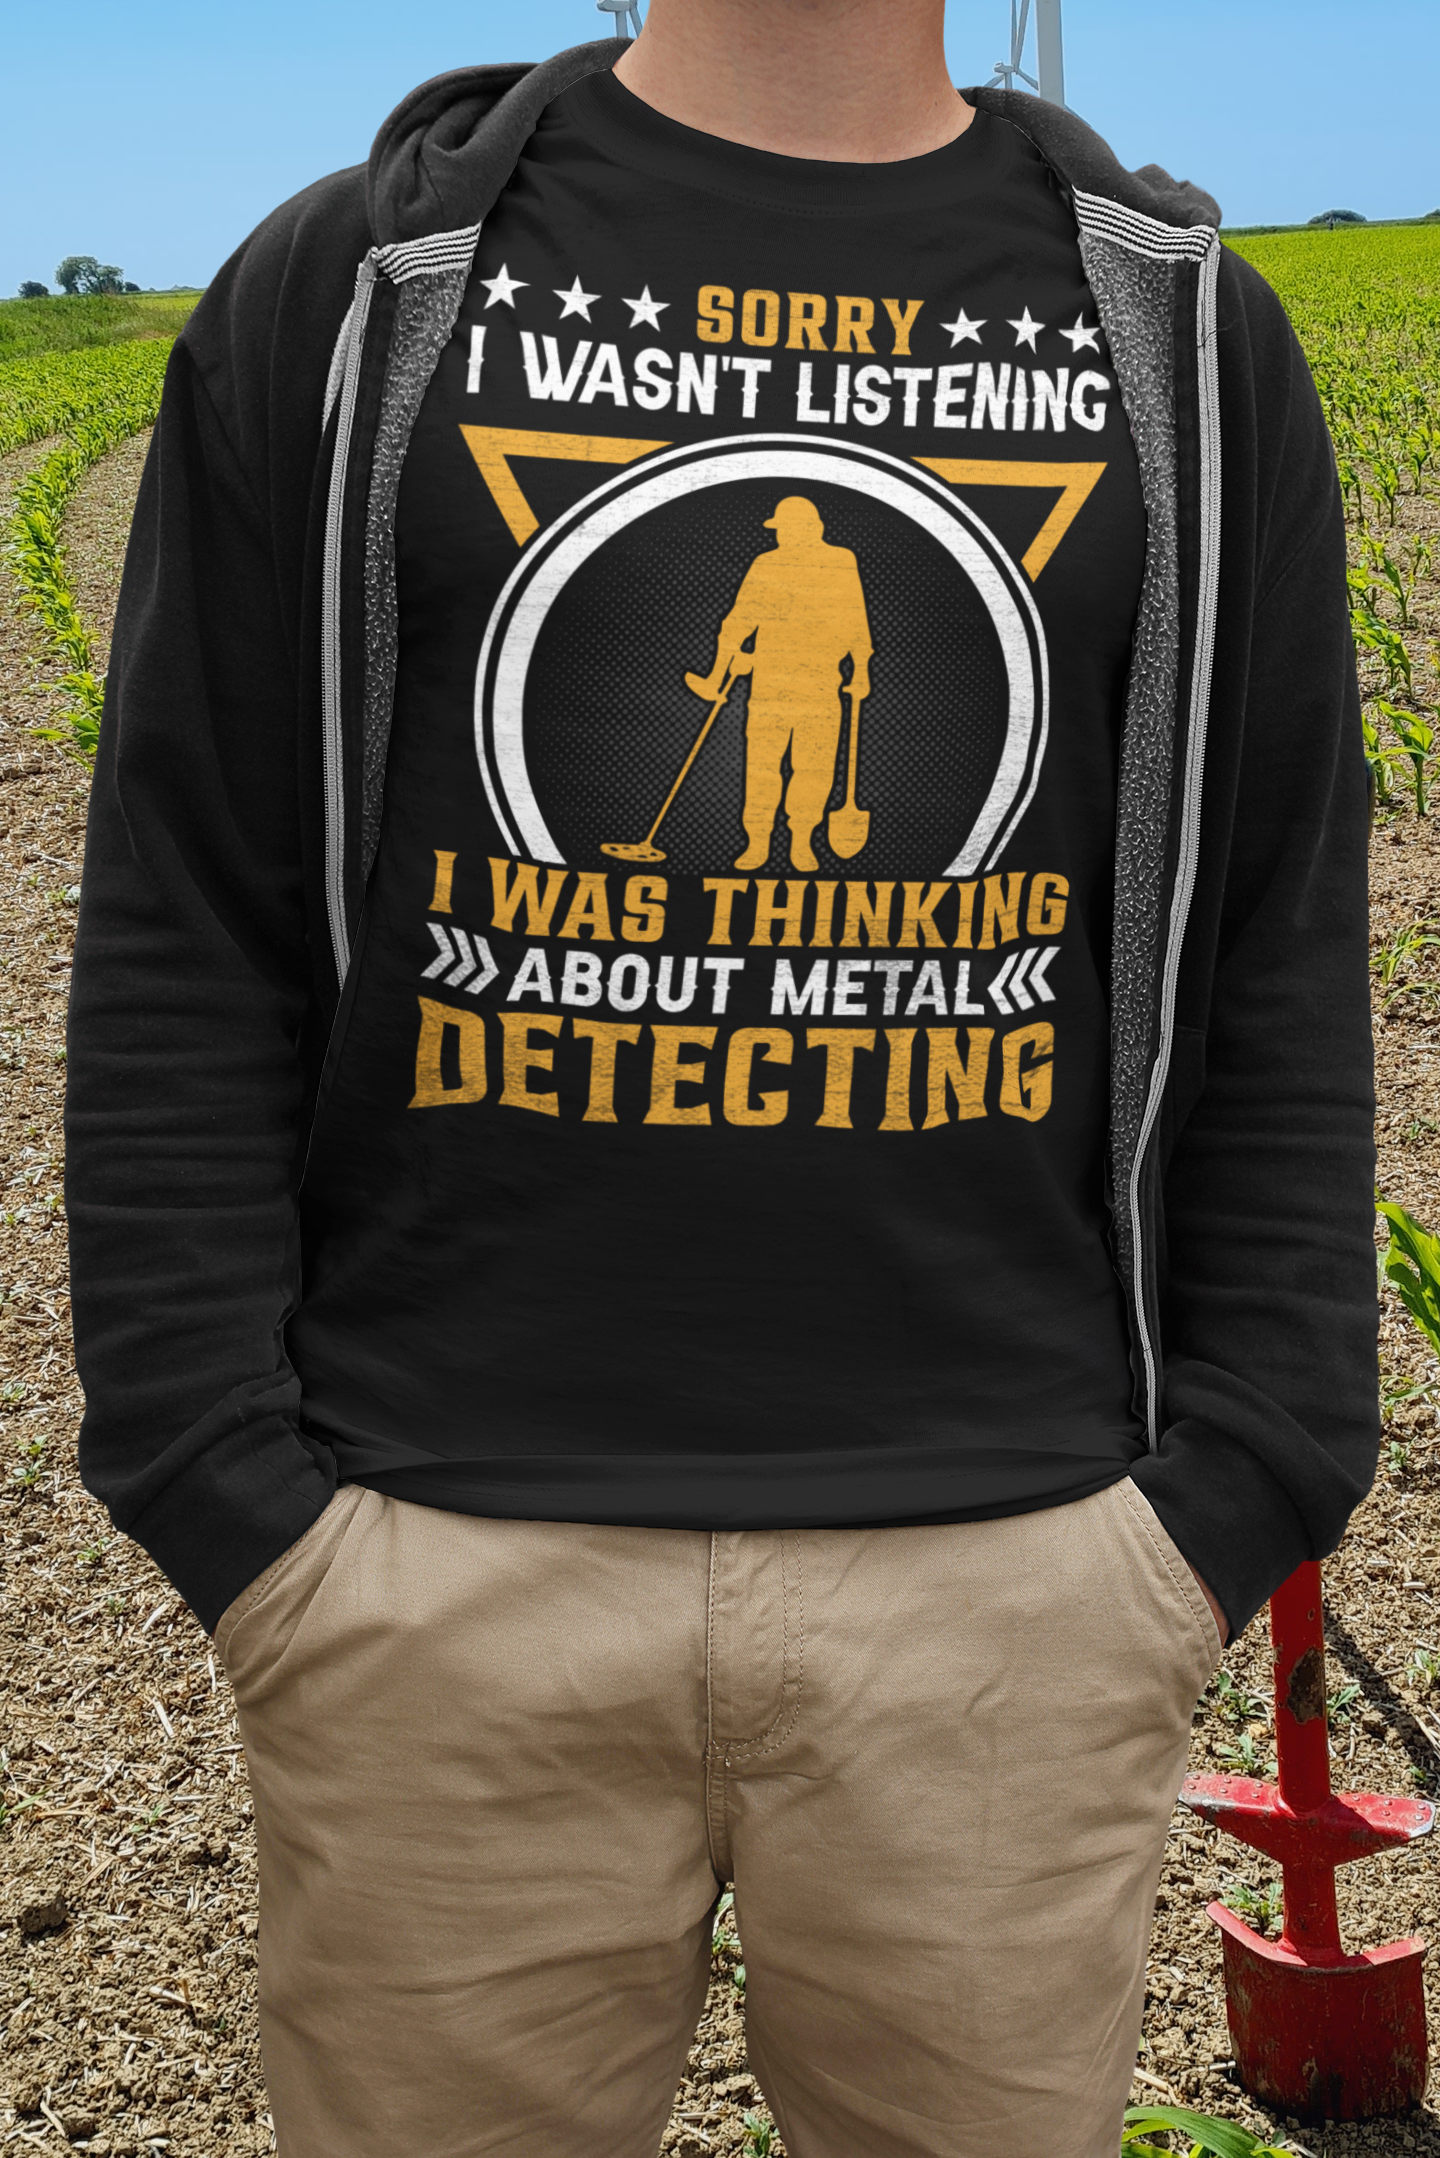 Sorry I wasn't listening, I was thinking about metal-detecting.